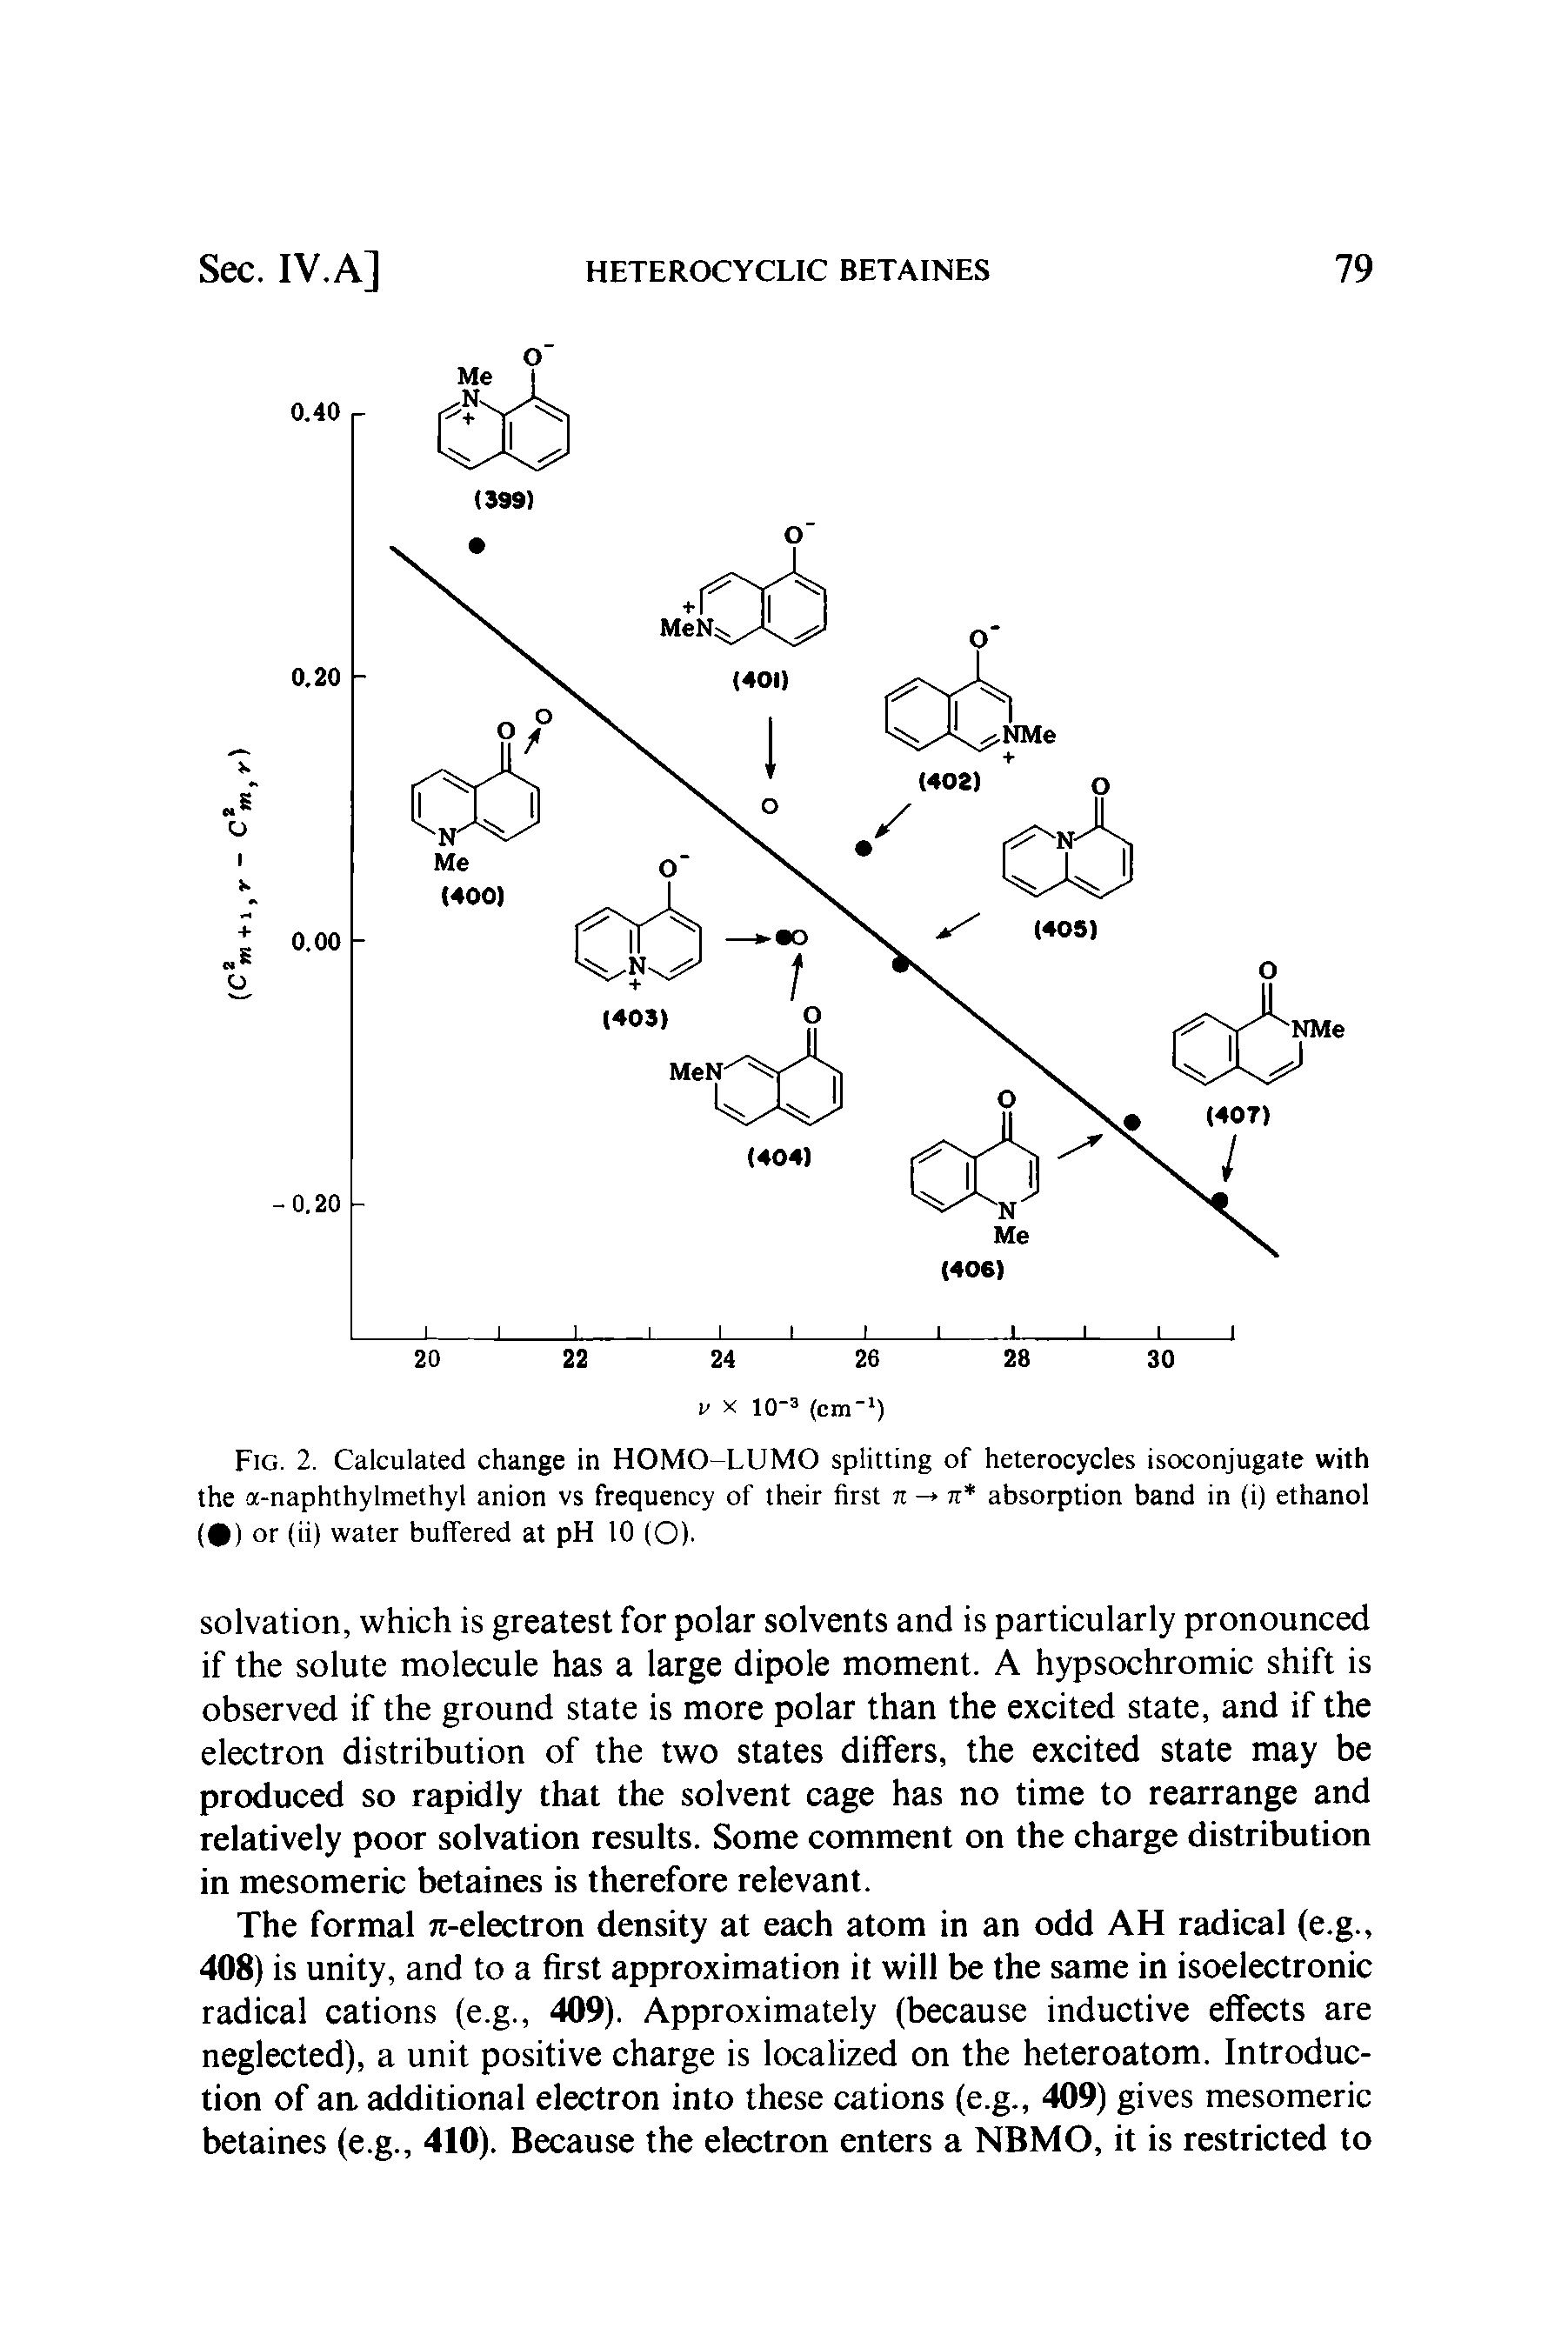 Fig. 2. Calculated change in HOMO-LUMO splitting of heterocycles isoconjugate with the a-naphthylmethyl anion vs frequency of their first n -> r absorption band in (i) ethanol ( ) or (ii) water buffered at pH 10 (O).